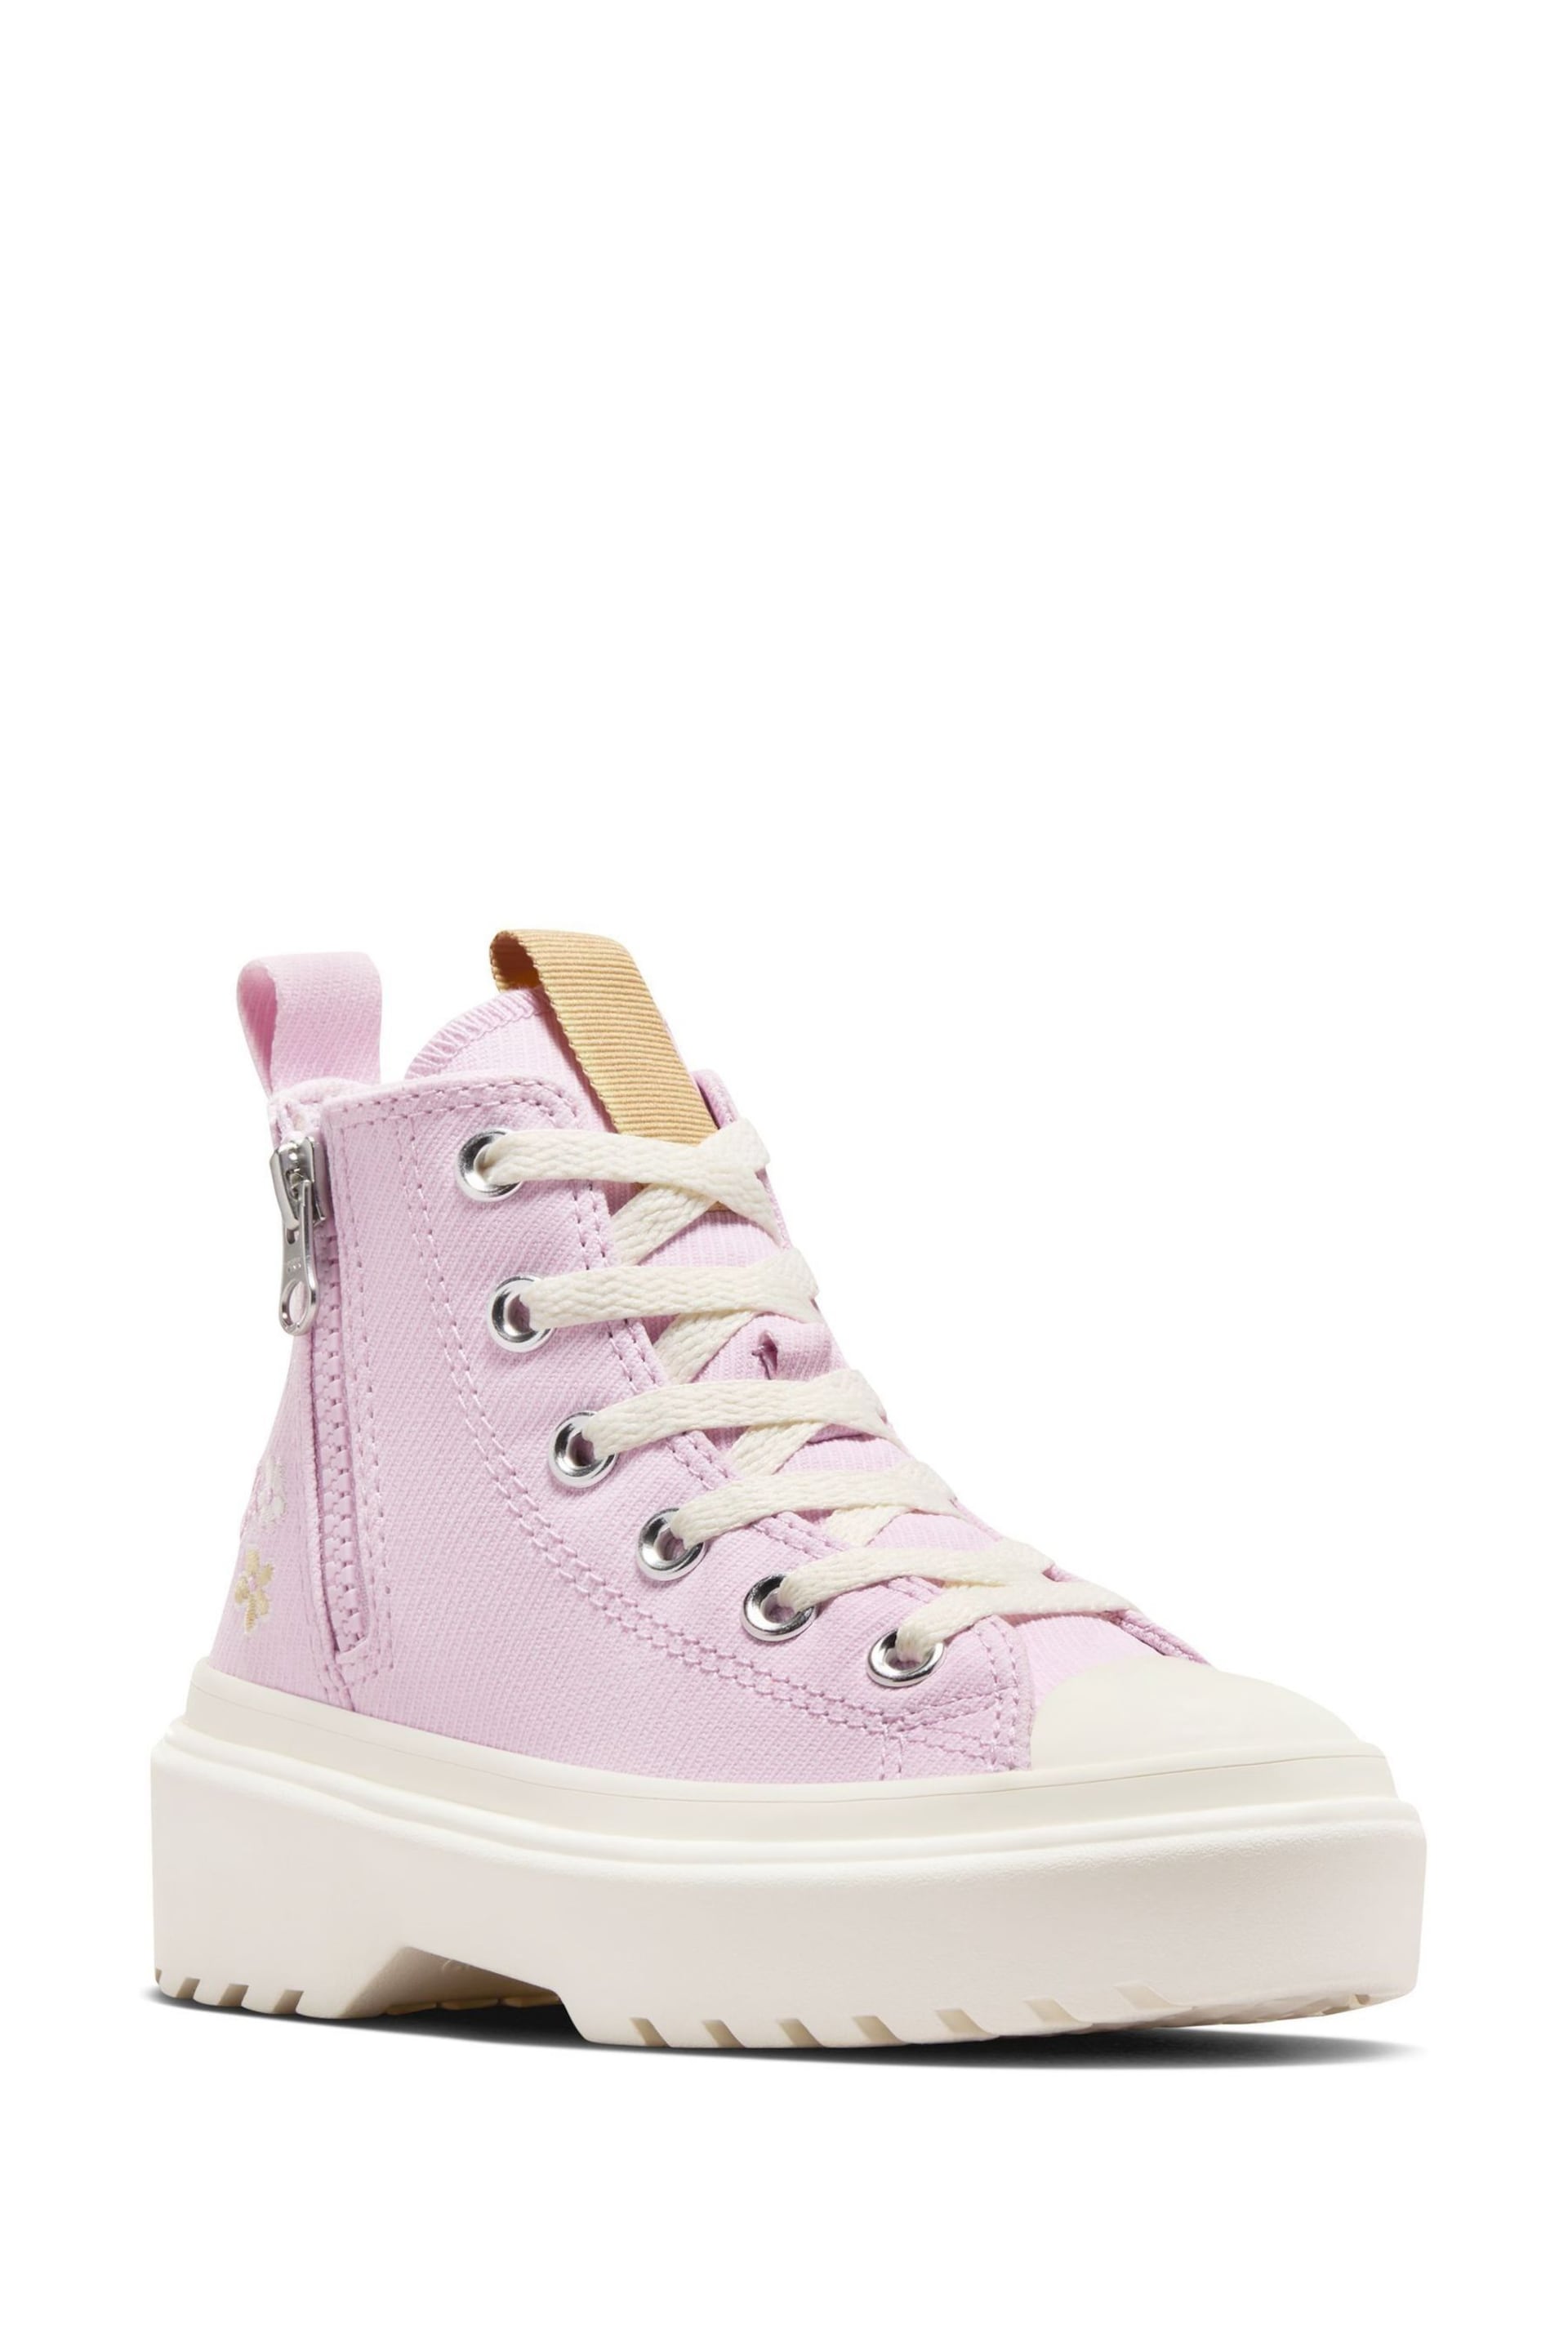 Converse Purple Chuck Taylor Flower Embroidered Lugged Lift Junior Trainers - Image 4 of 12